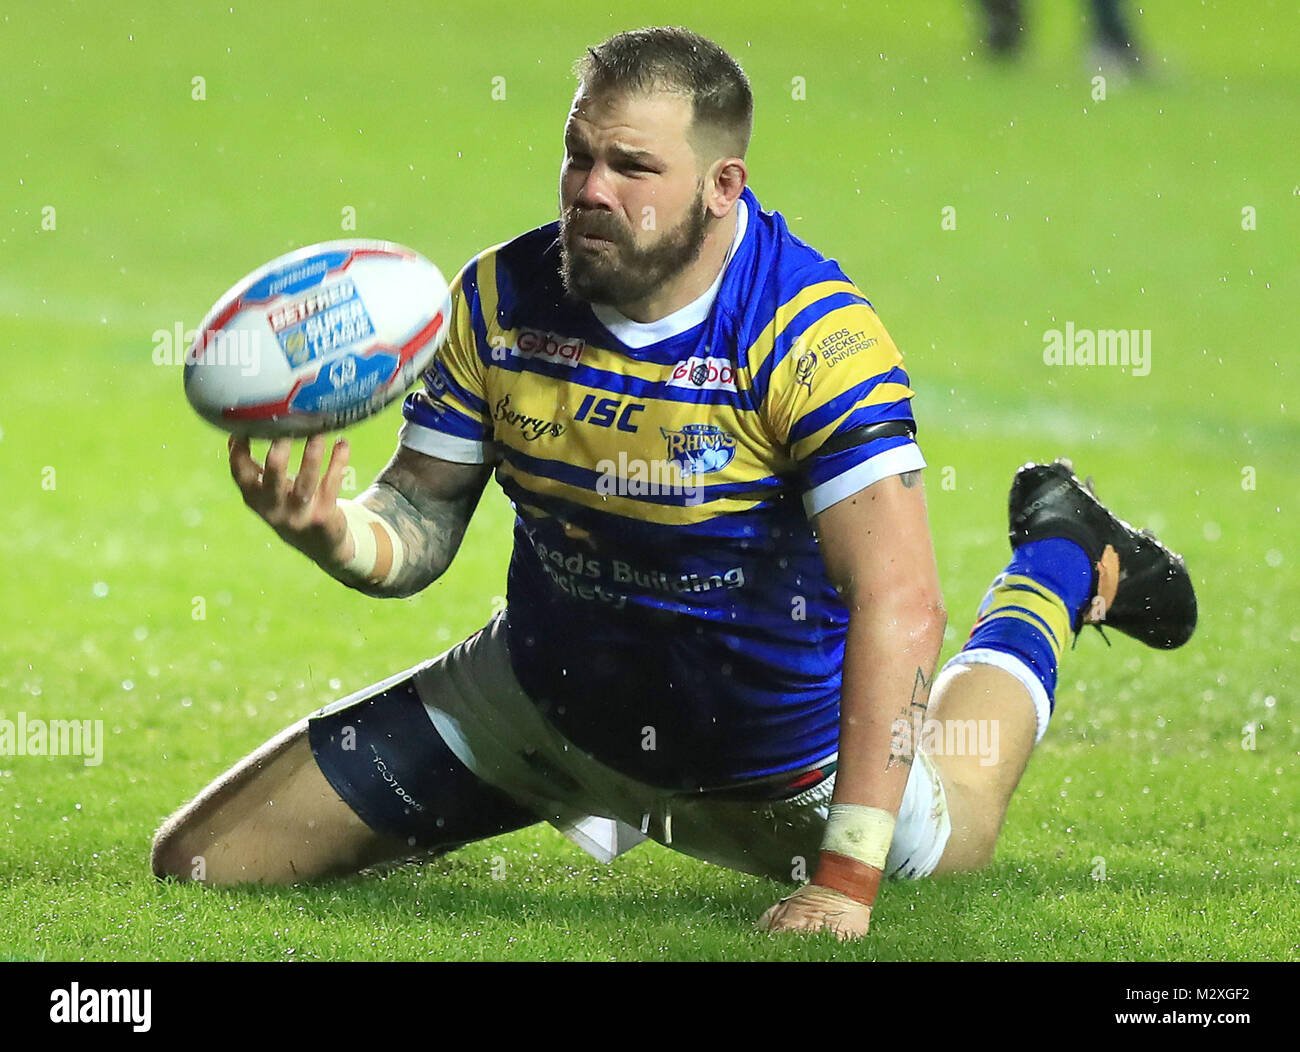 Leeds Rhinos' Adam Cuthbertson dives in to score his sides first try during the Betfred Super League match at Elland Road, Leeds. Stock Photo